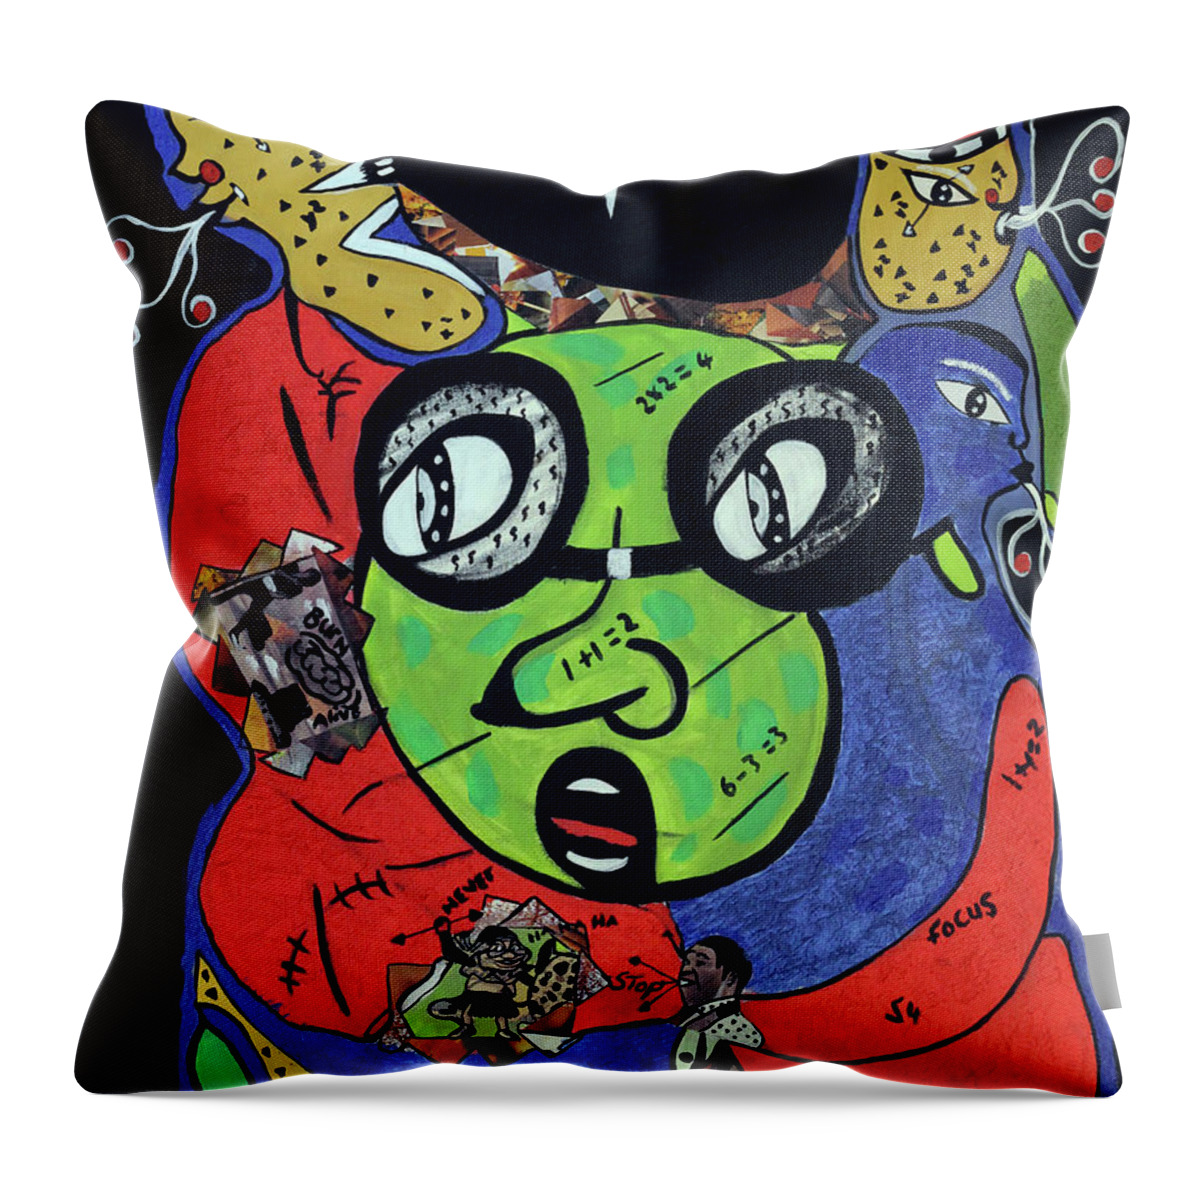 Soweto Throw Pillow featuring the painting Watching You by Nkuly Sibeko